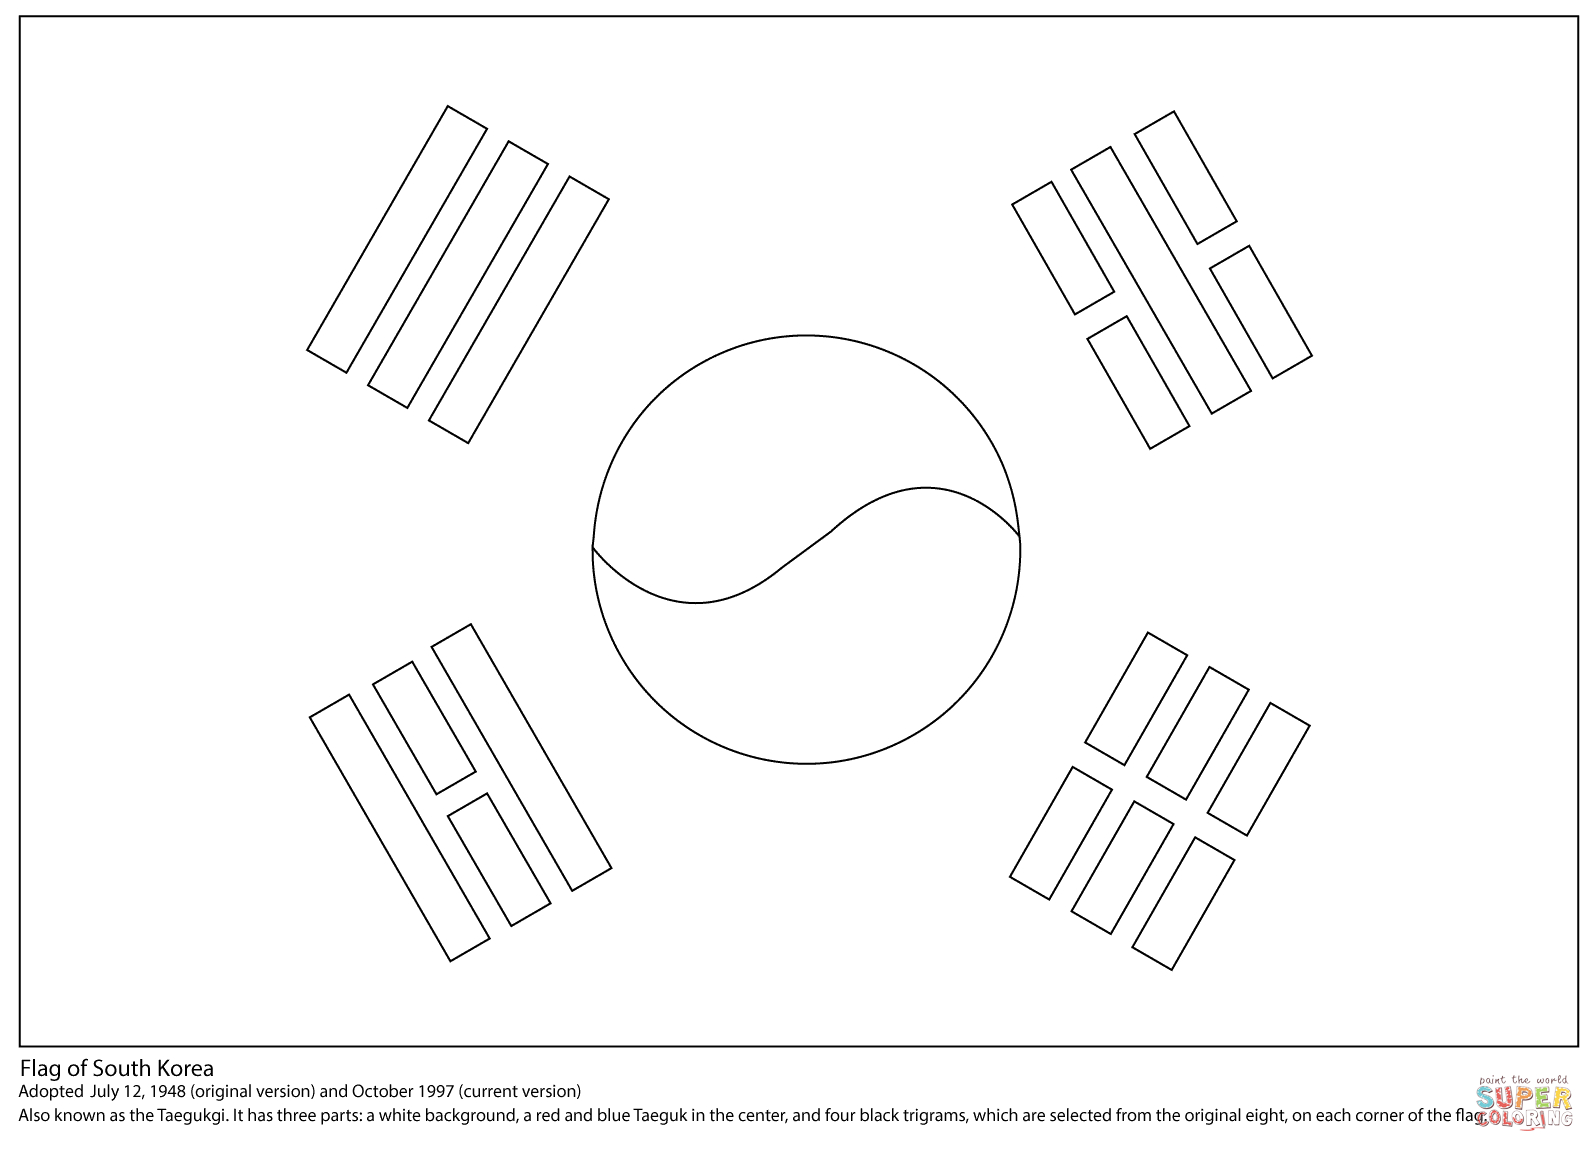 Israel Flag Coloring Page Flag Of South Korea Coloring Page Free Printable Coloring Pages